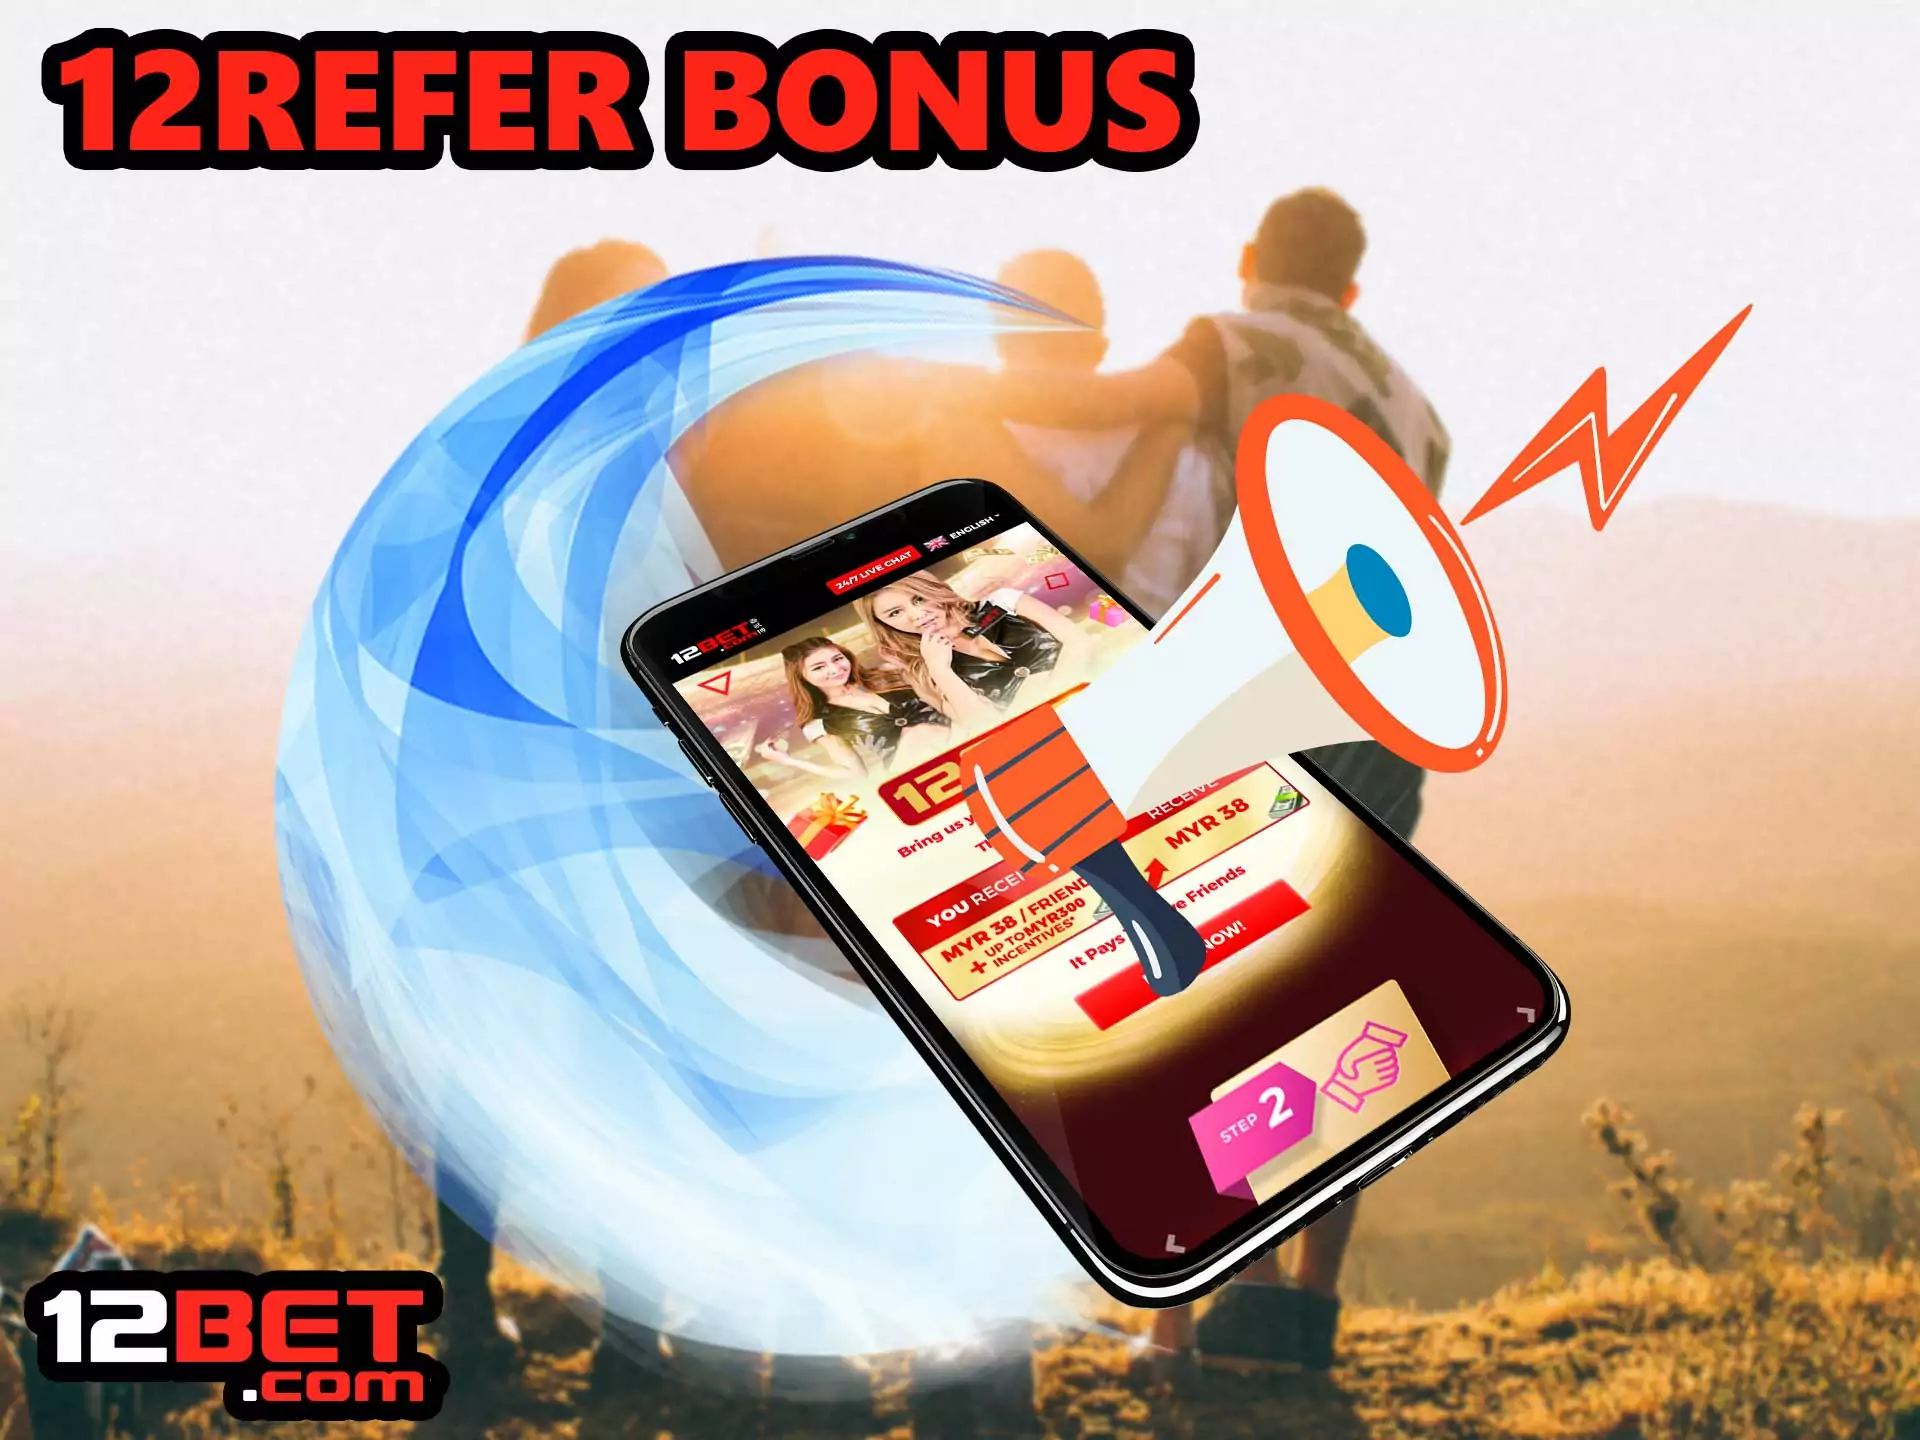 Each user gets a chance to get promotions quickly, you just need to refer a friend and you will earn 646 Indian rupees.